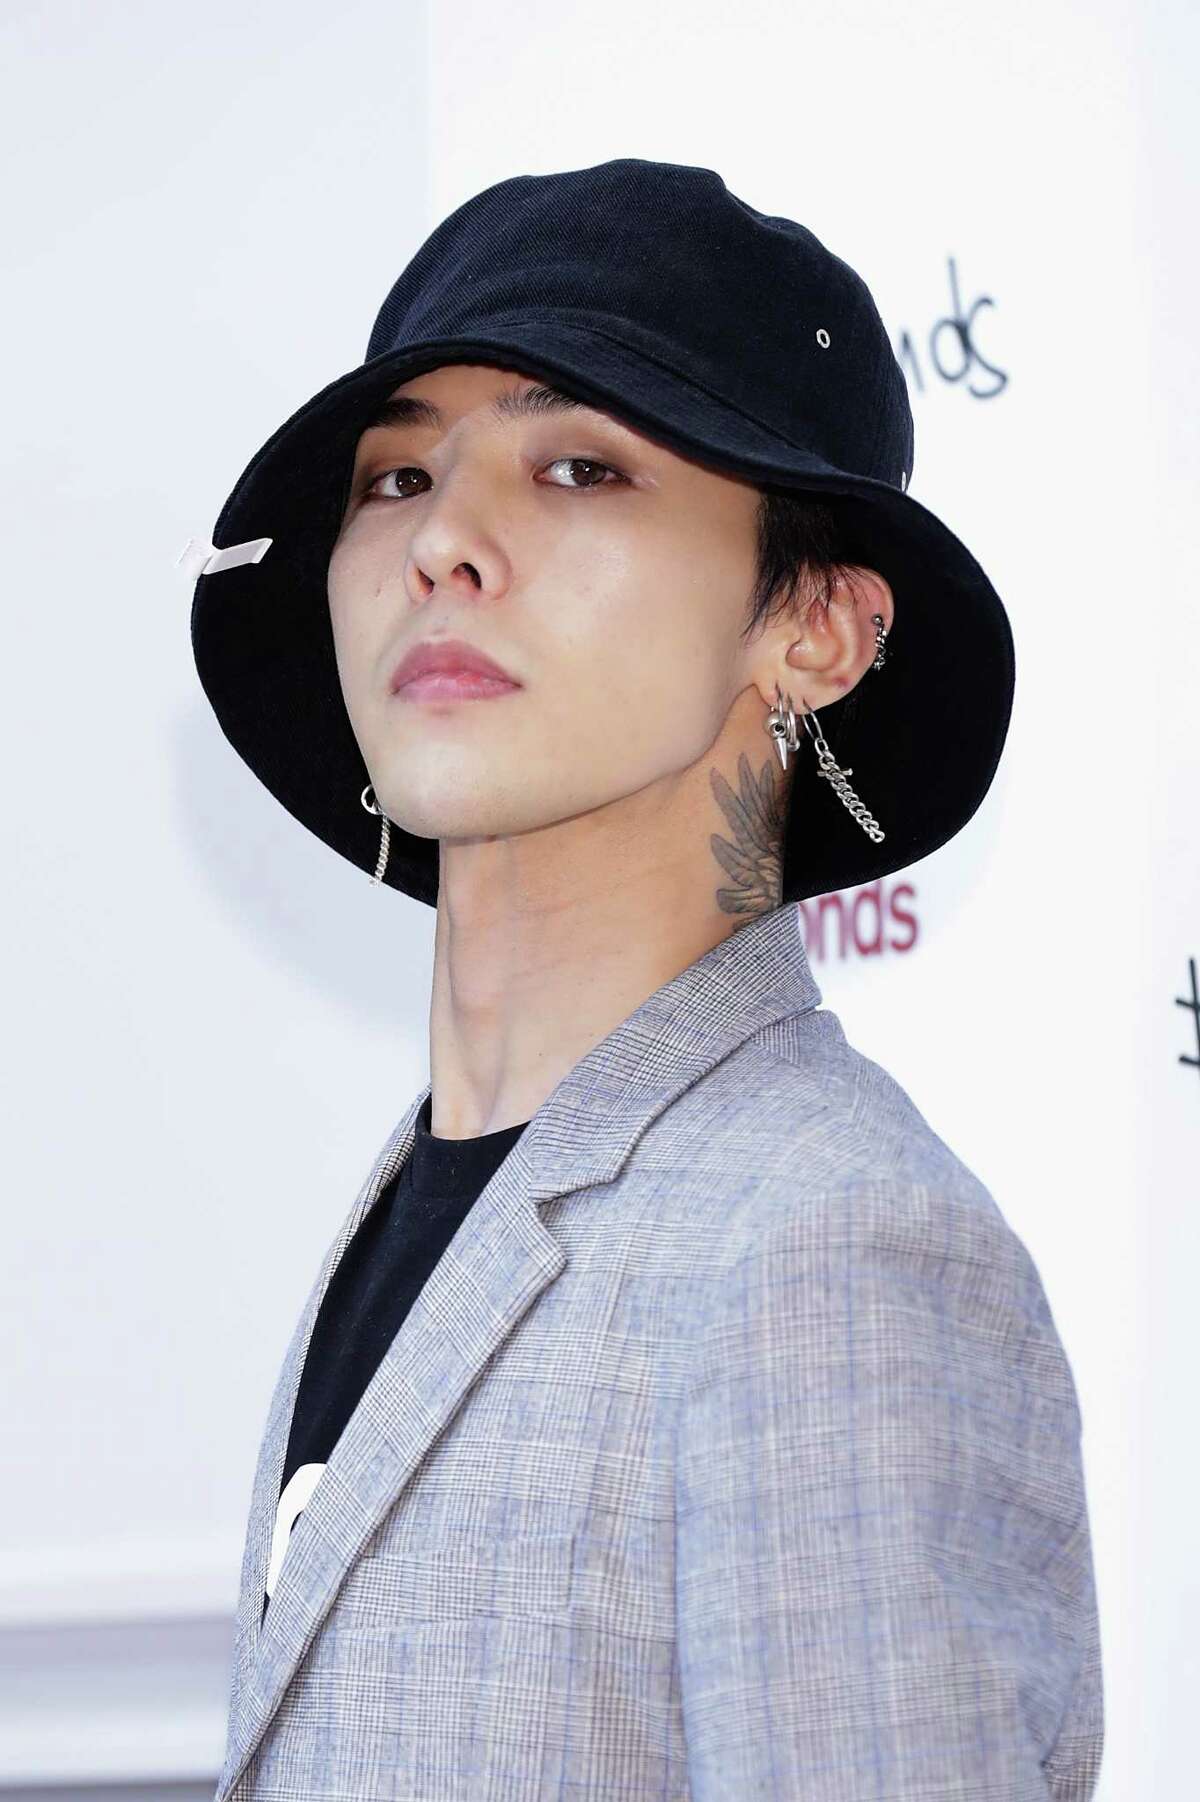 Nine things you need to know about GDragon, the Kpop superstar